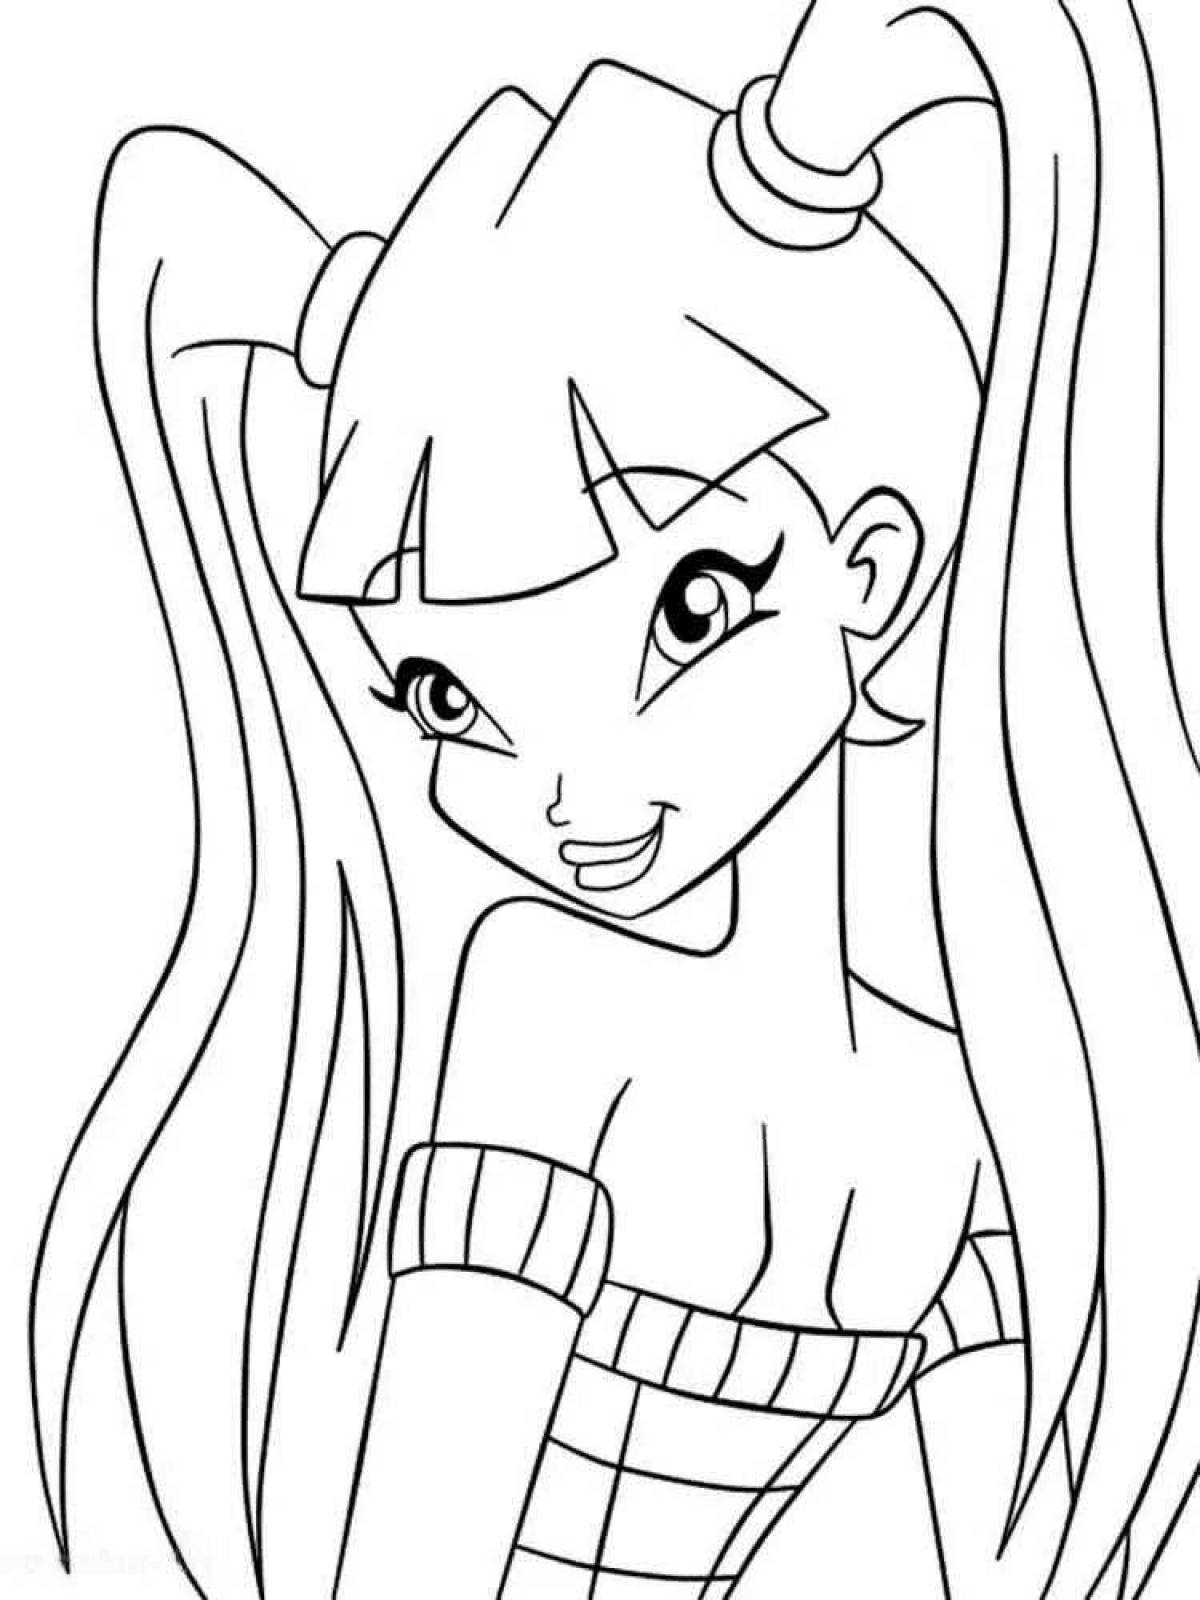 Coloring photo #2